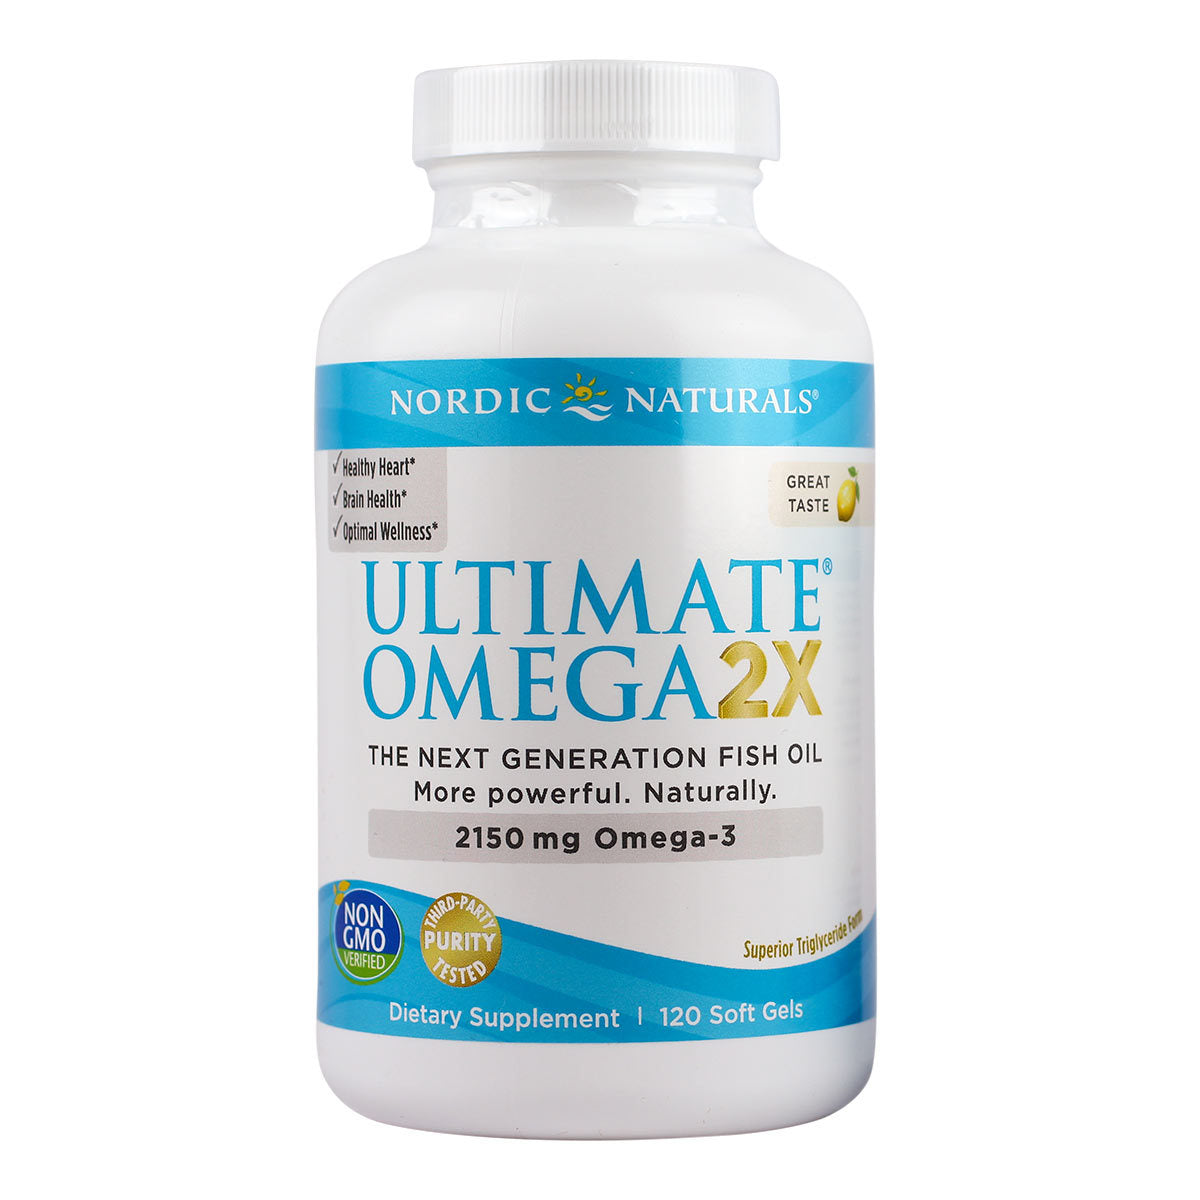 Primary image of Ultimate Omega 2X Soft Gels